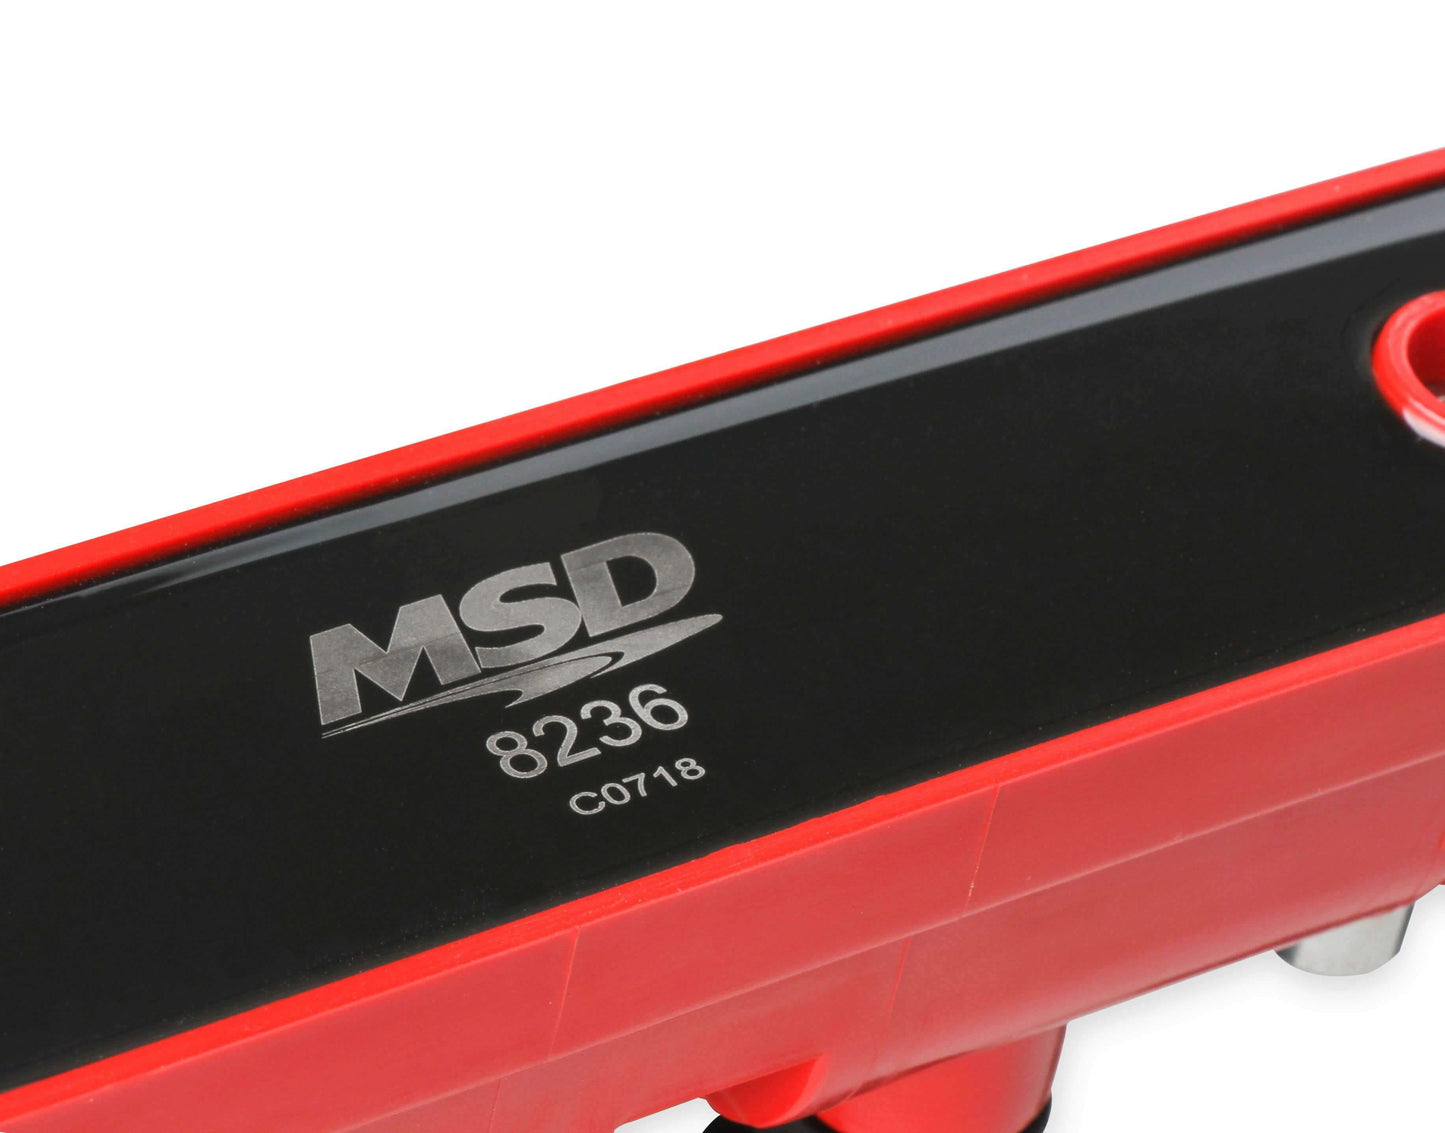 MSD 8236 -Ignition Coil Blaster Series, '11-'20 GM 1.4L Turbo, Red- Single pack